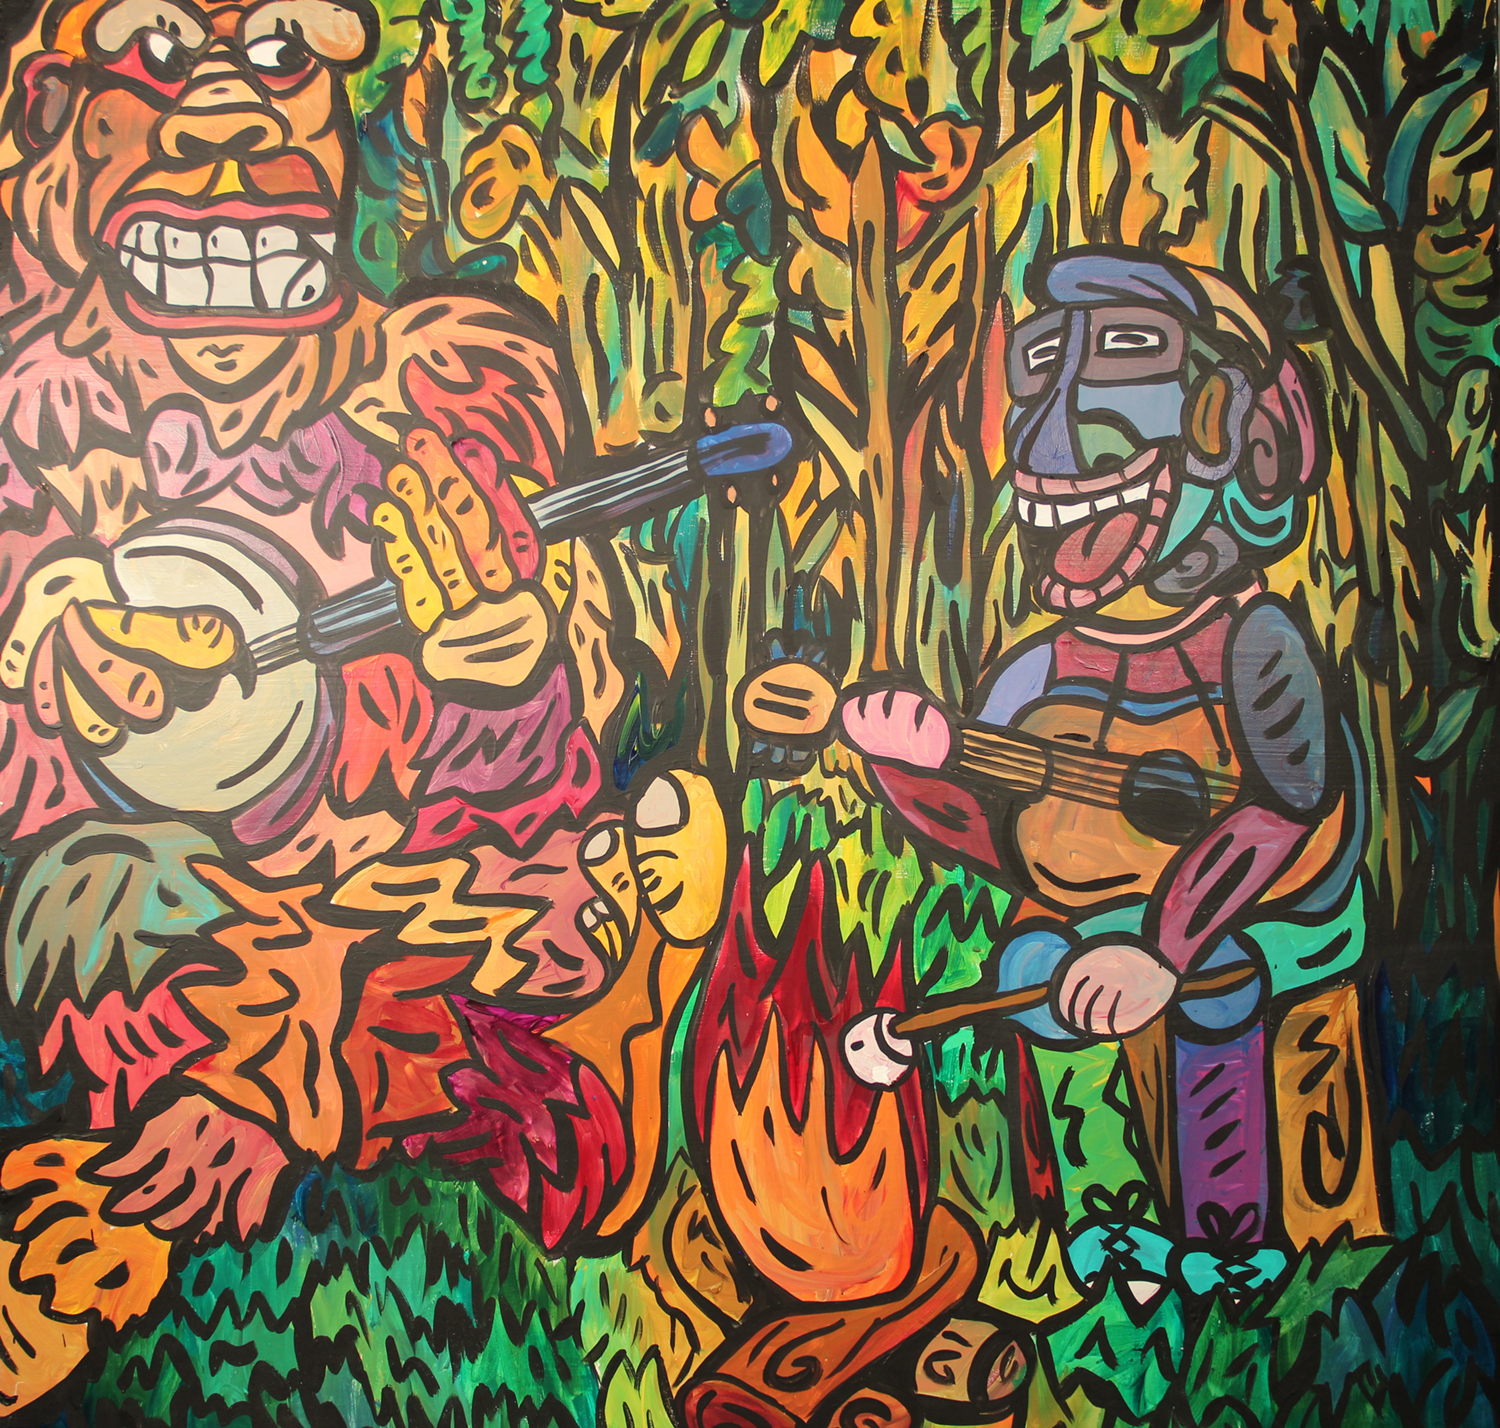 pop art-inspired painting with heavy lines and bright colors of a monkey and a Sasquatch playing instruments. Image courtesy of Courtney Huston